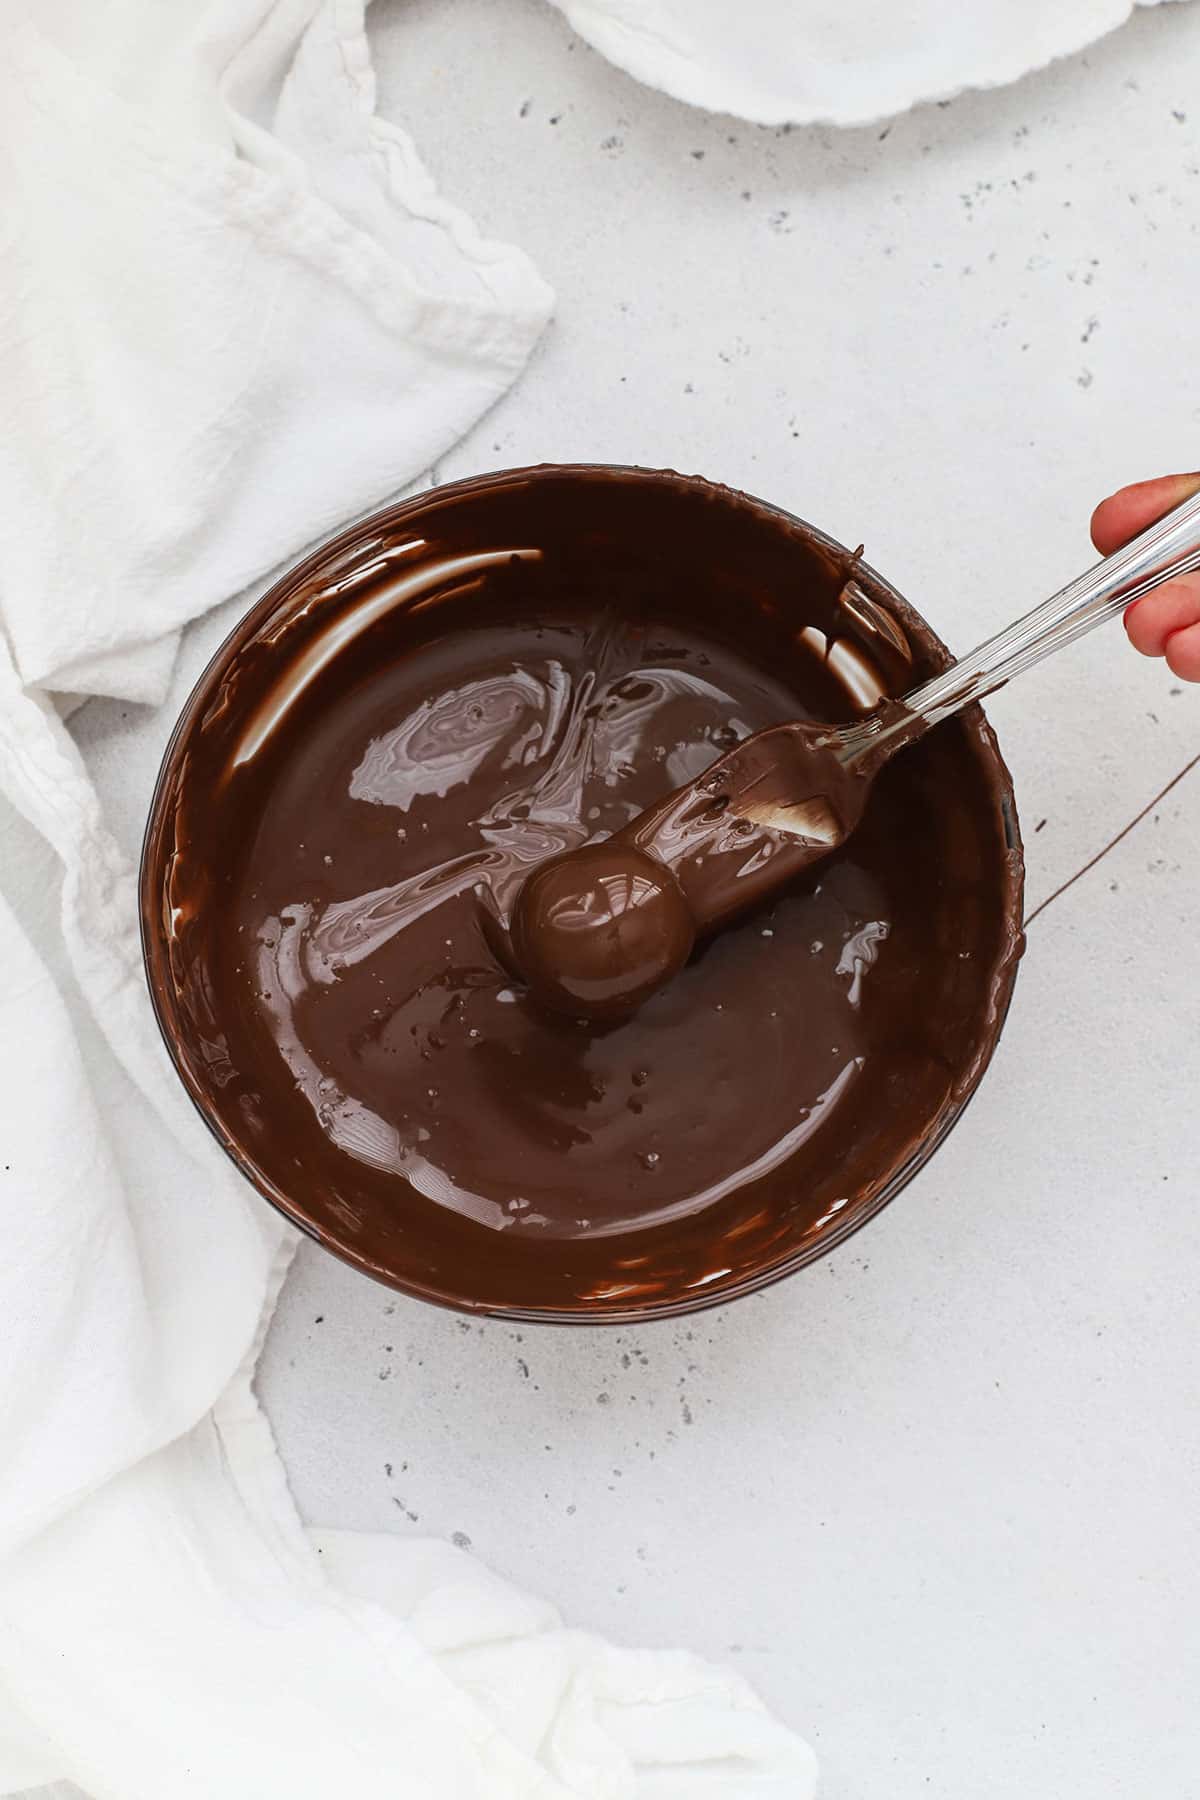 Dipping gluten-free Oreo balls into melted chocolate